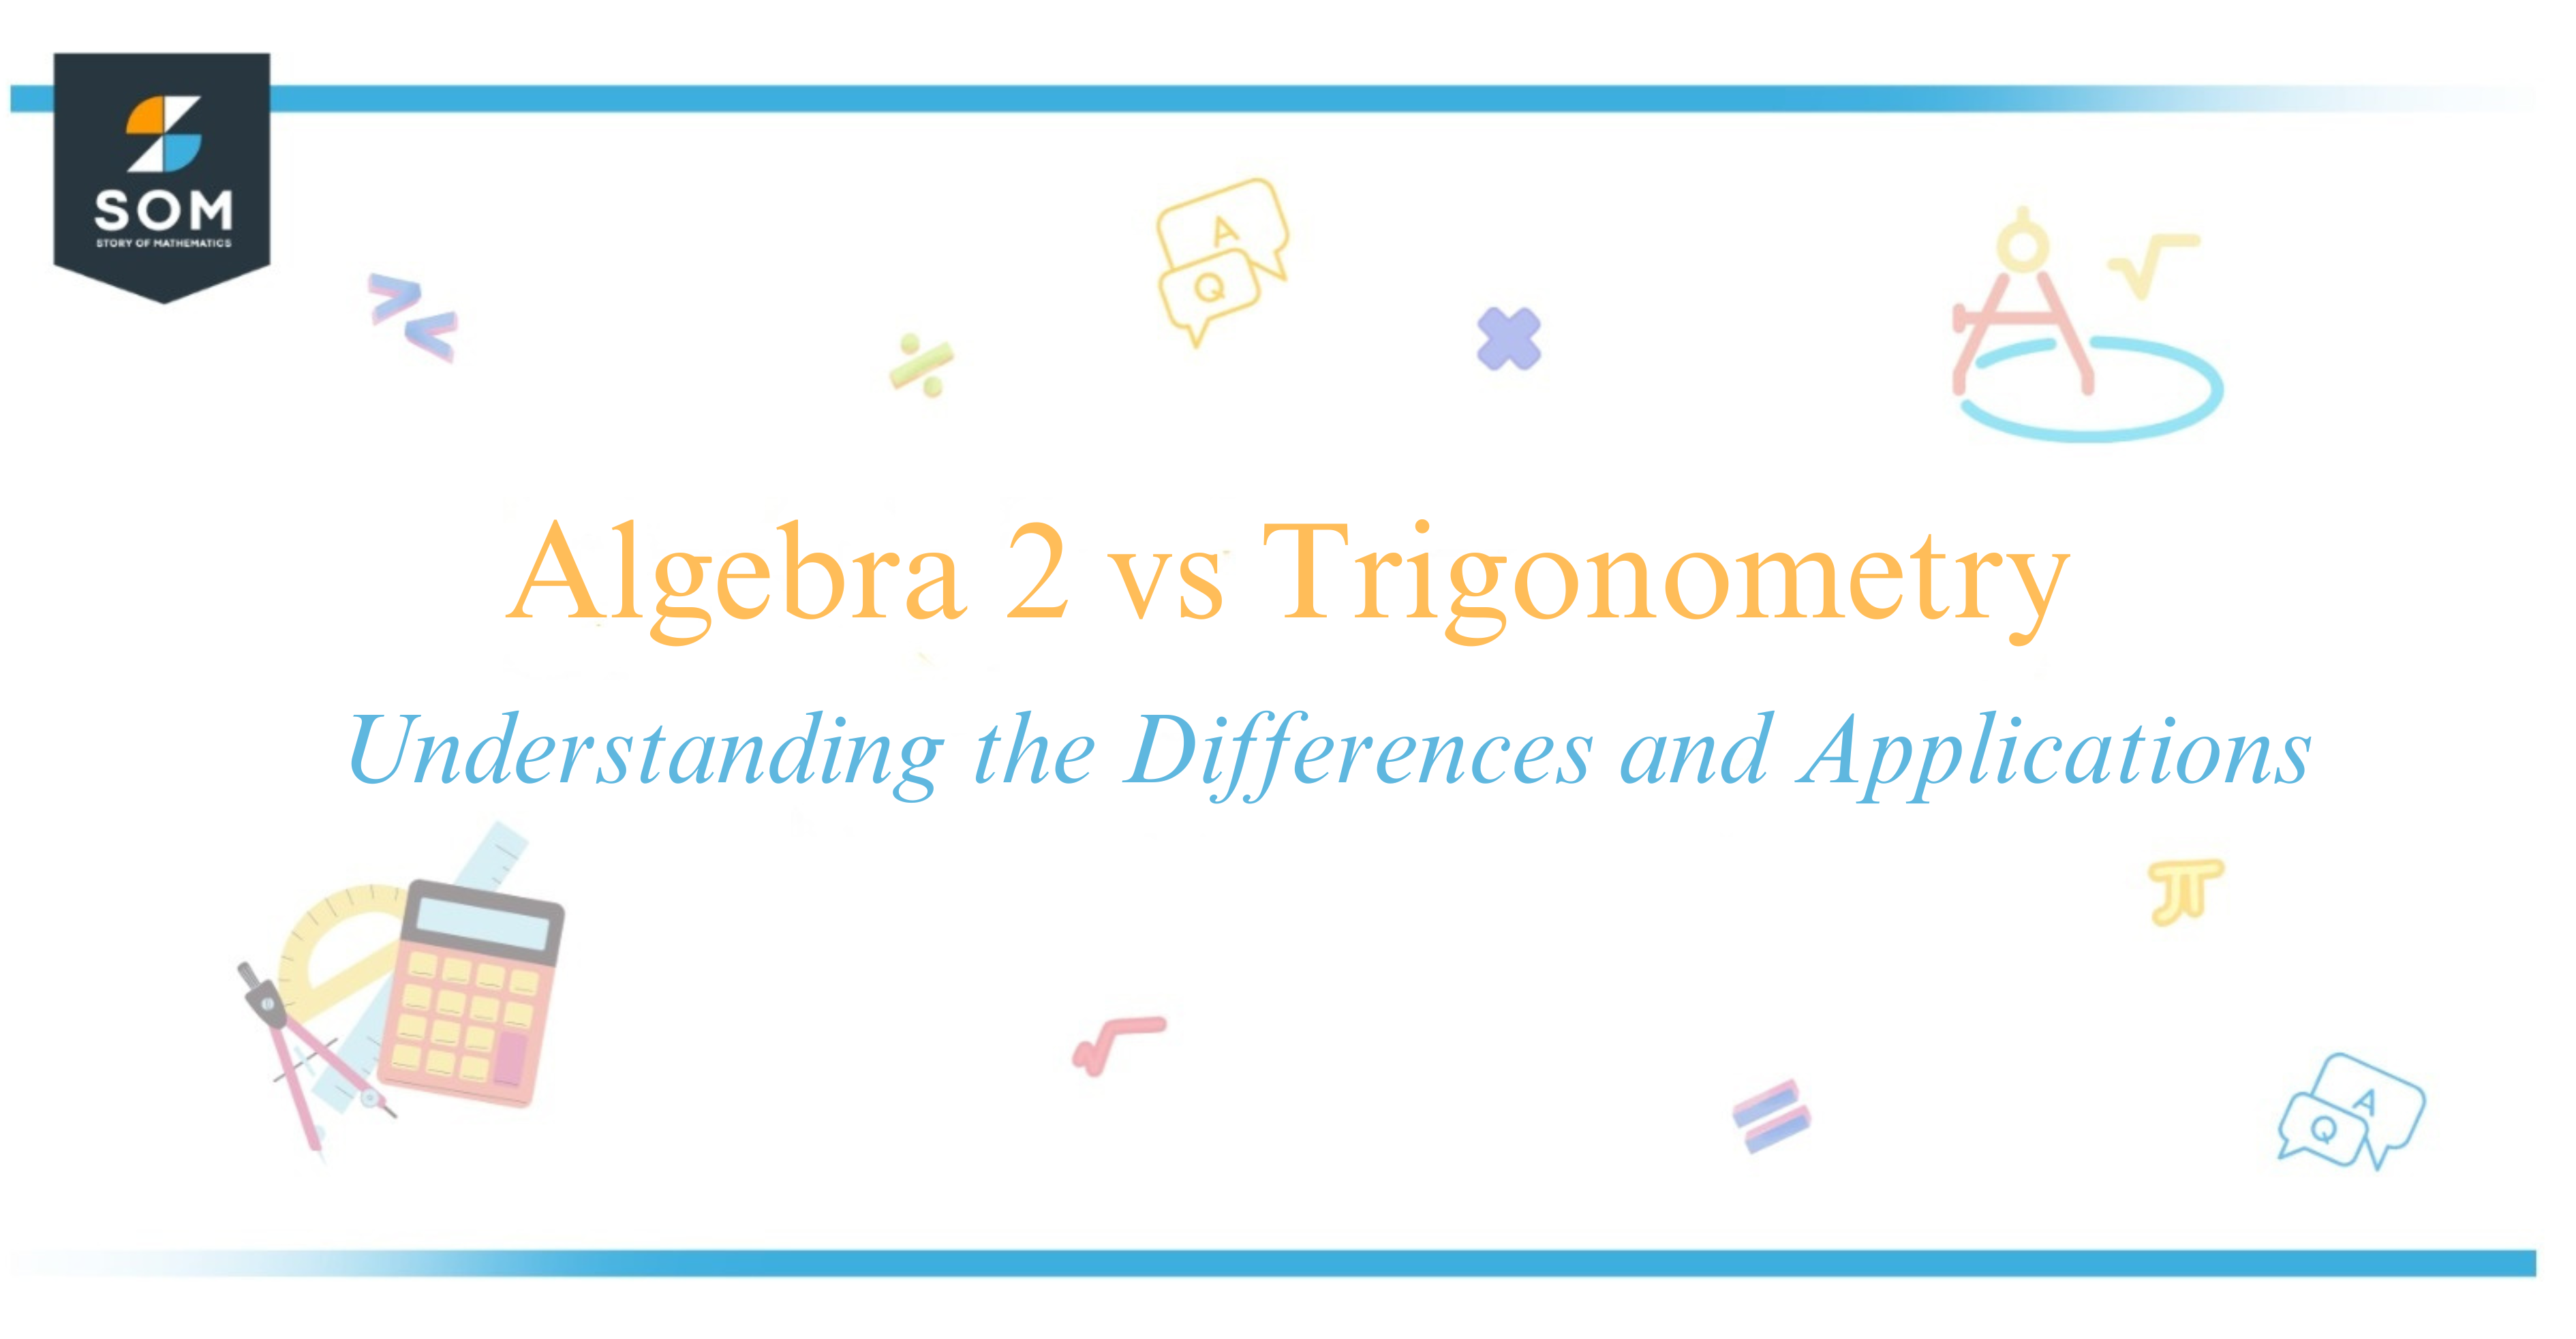 Algebra 2 vs Trigonometry Understanding the Differences and Applications